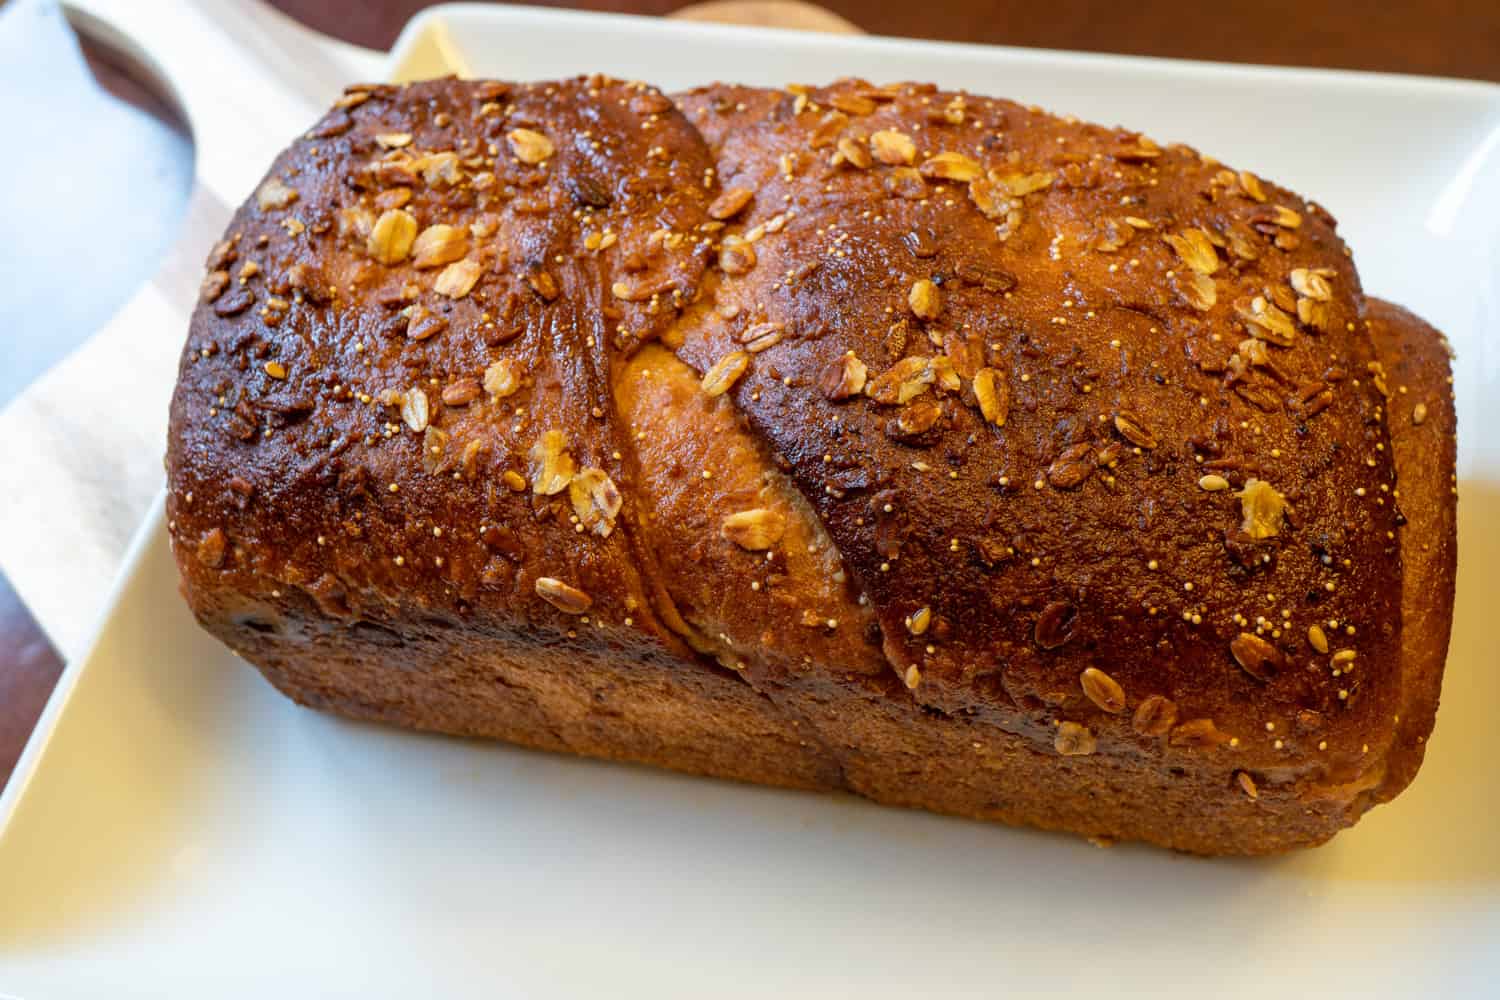 Homemade whole grain bread made with 11 whole grains